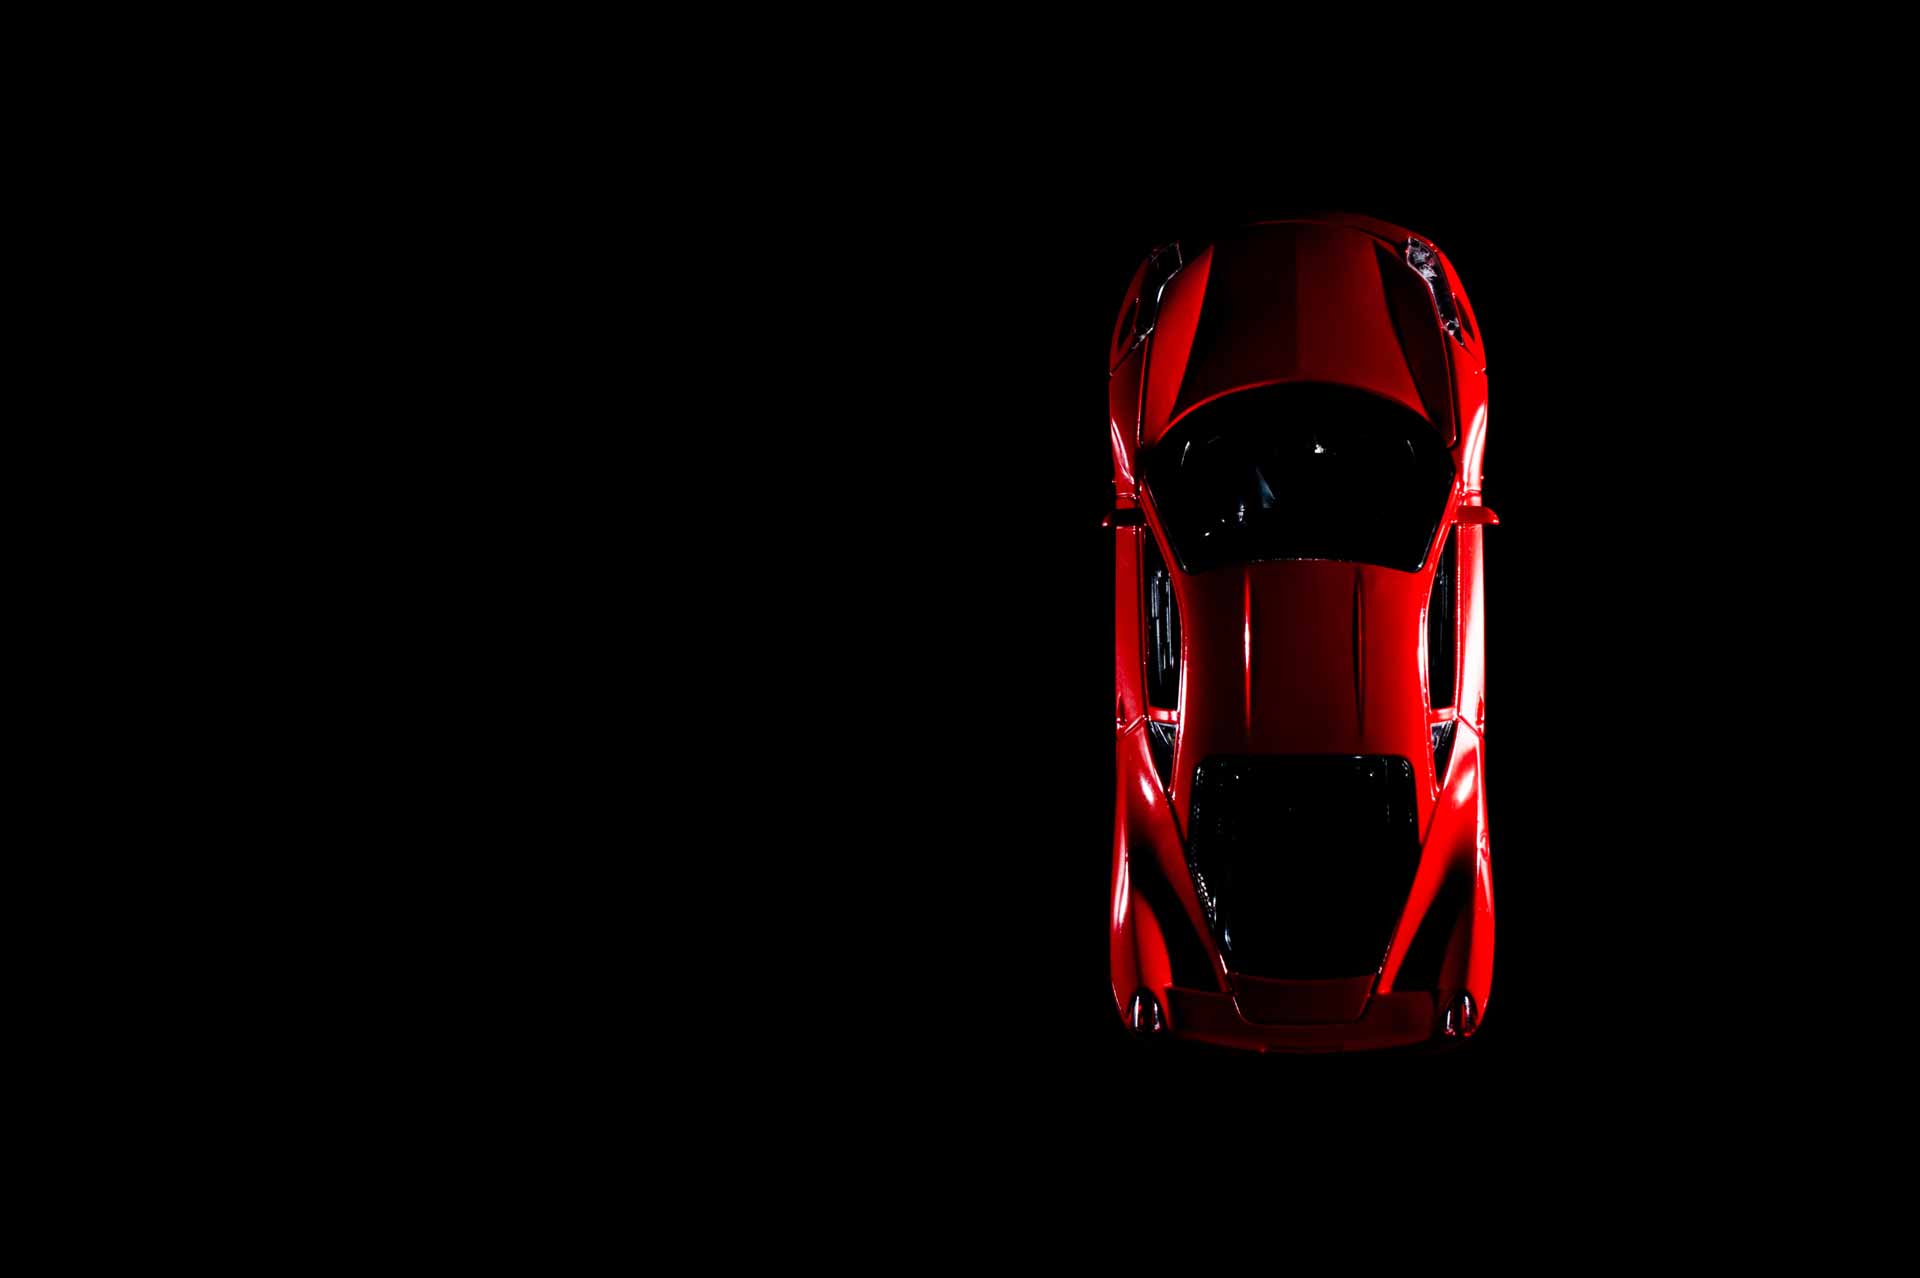 Top angle of red sports car in dark room